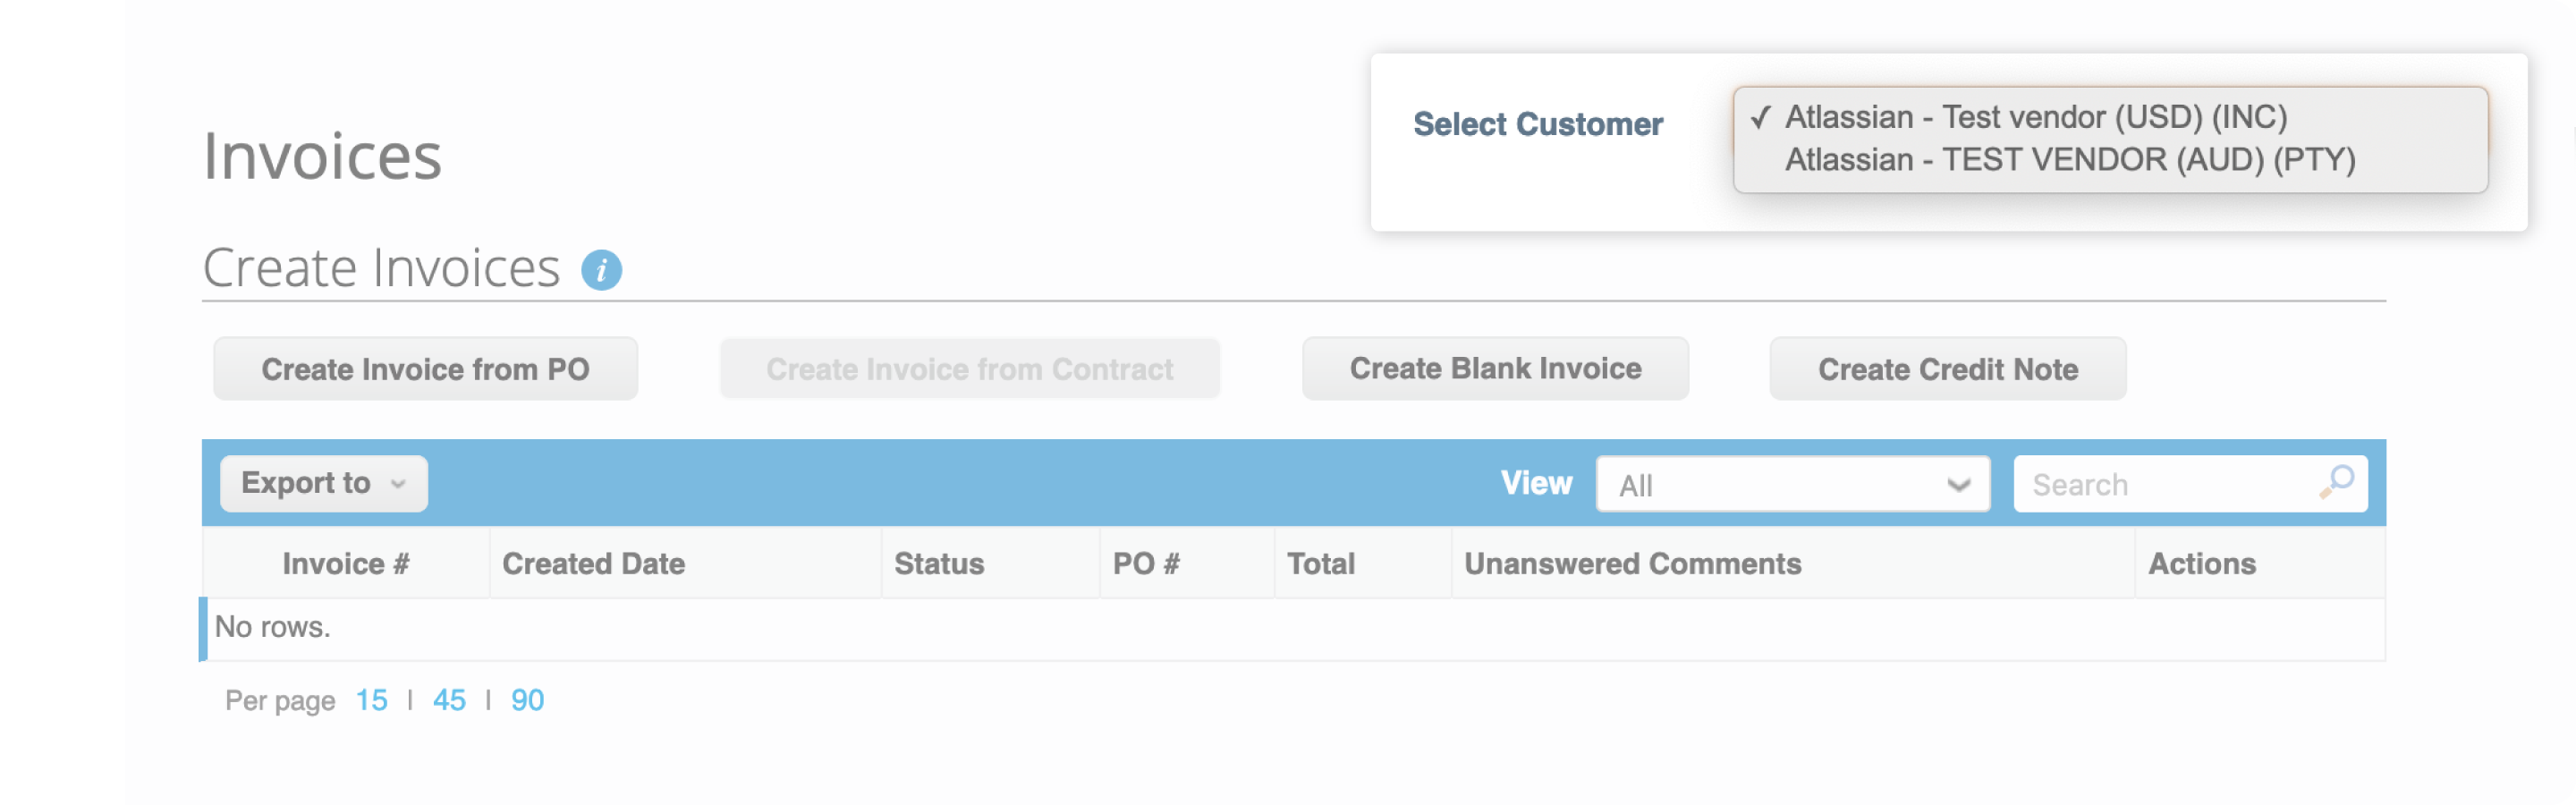 Supplier needs to go to the Invoices tab and click Create blank invoice